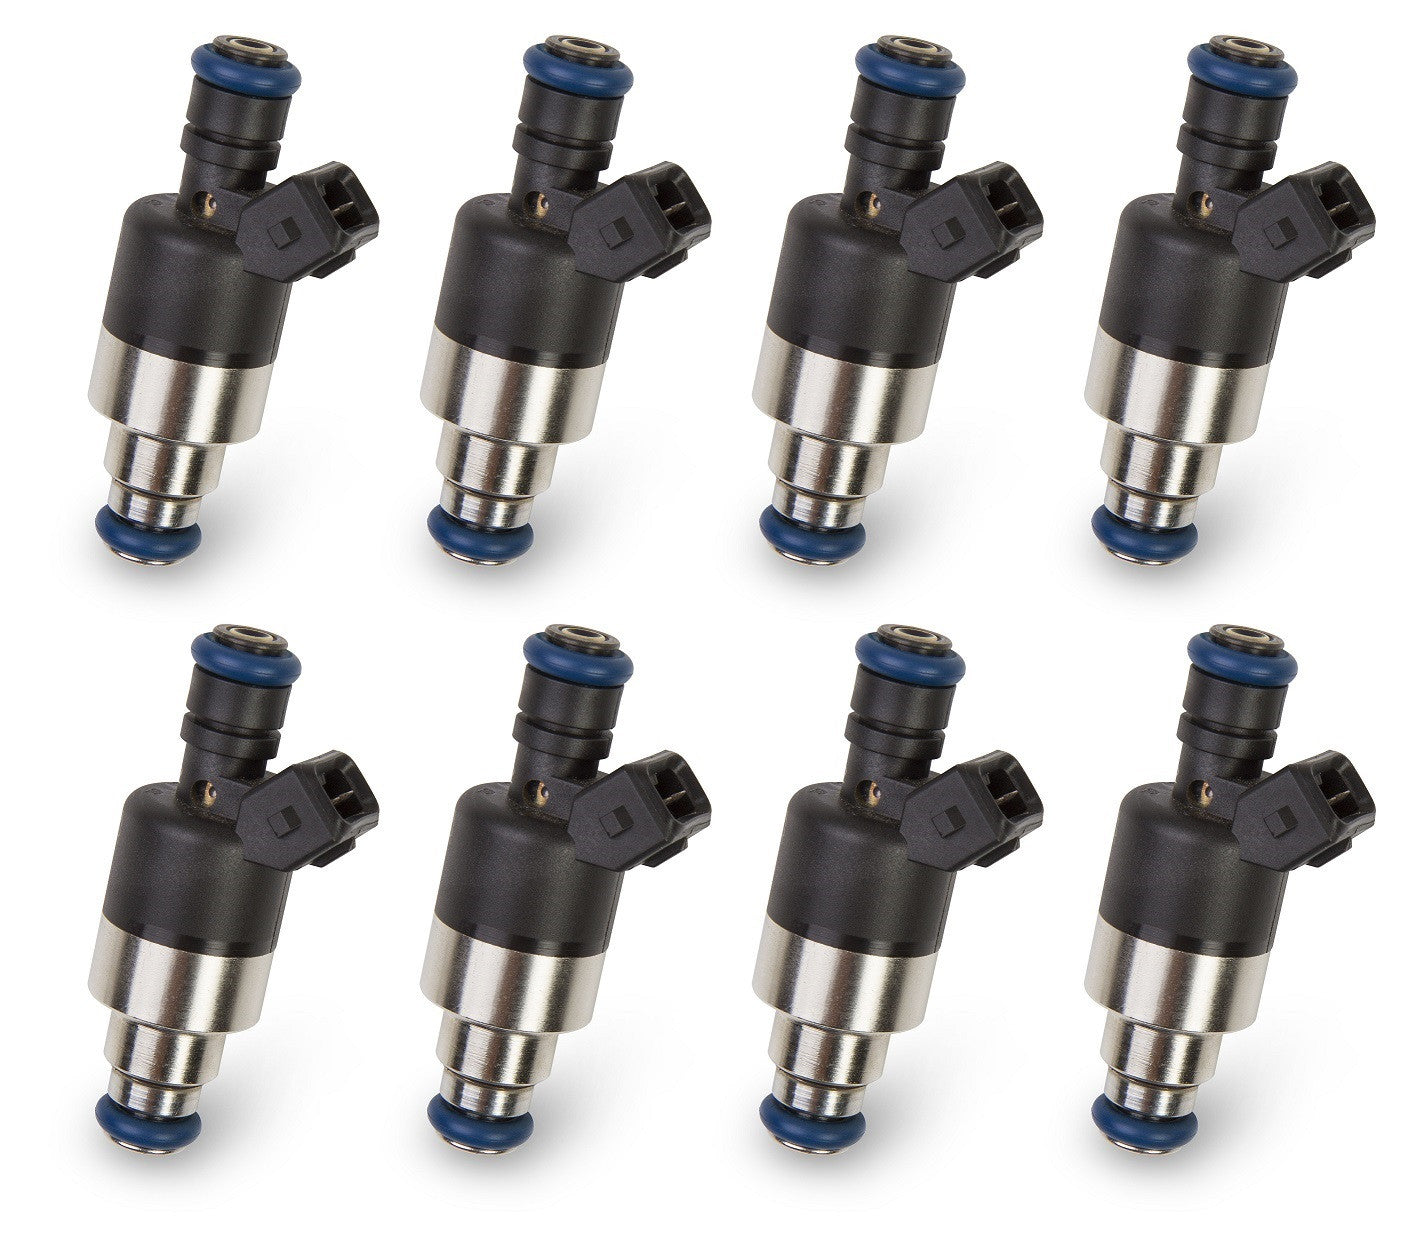 KIT- FUEL INJECTOR 48 PPH, 8 PACK (Up to 765 HP N/A or 590 HP Boosted on Gasoline)